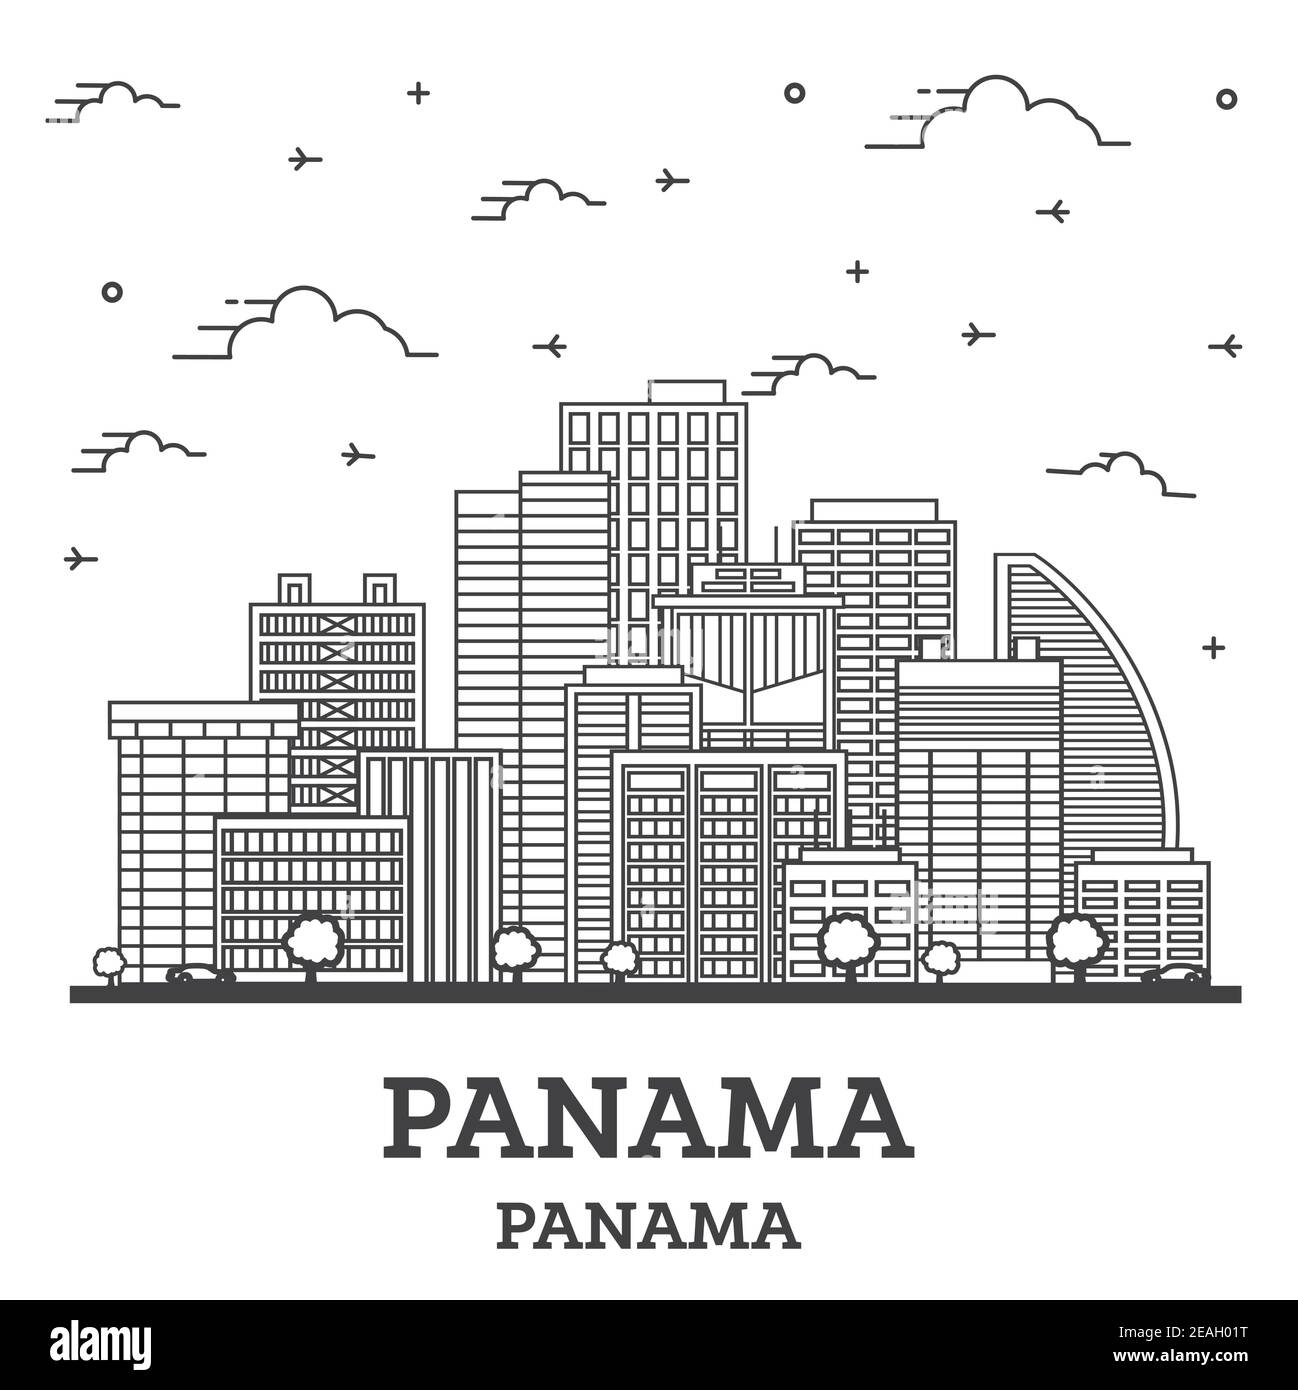 Outline Panama City Skyline with Modern Buildings Isolated on White. Vector Illustration. Panama Cityscape with Landmarks. Stock Vector